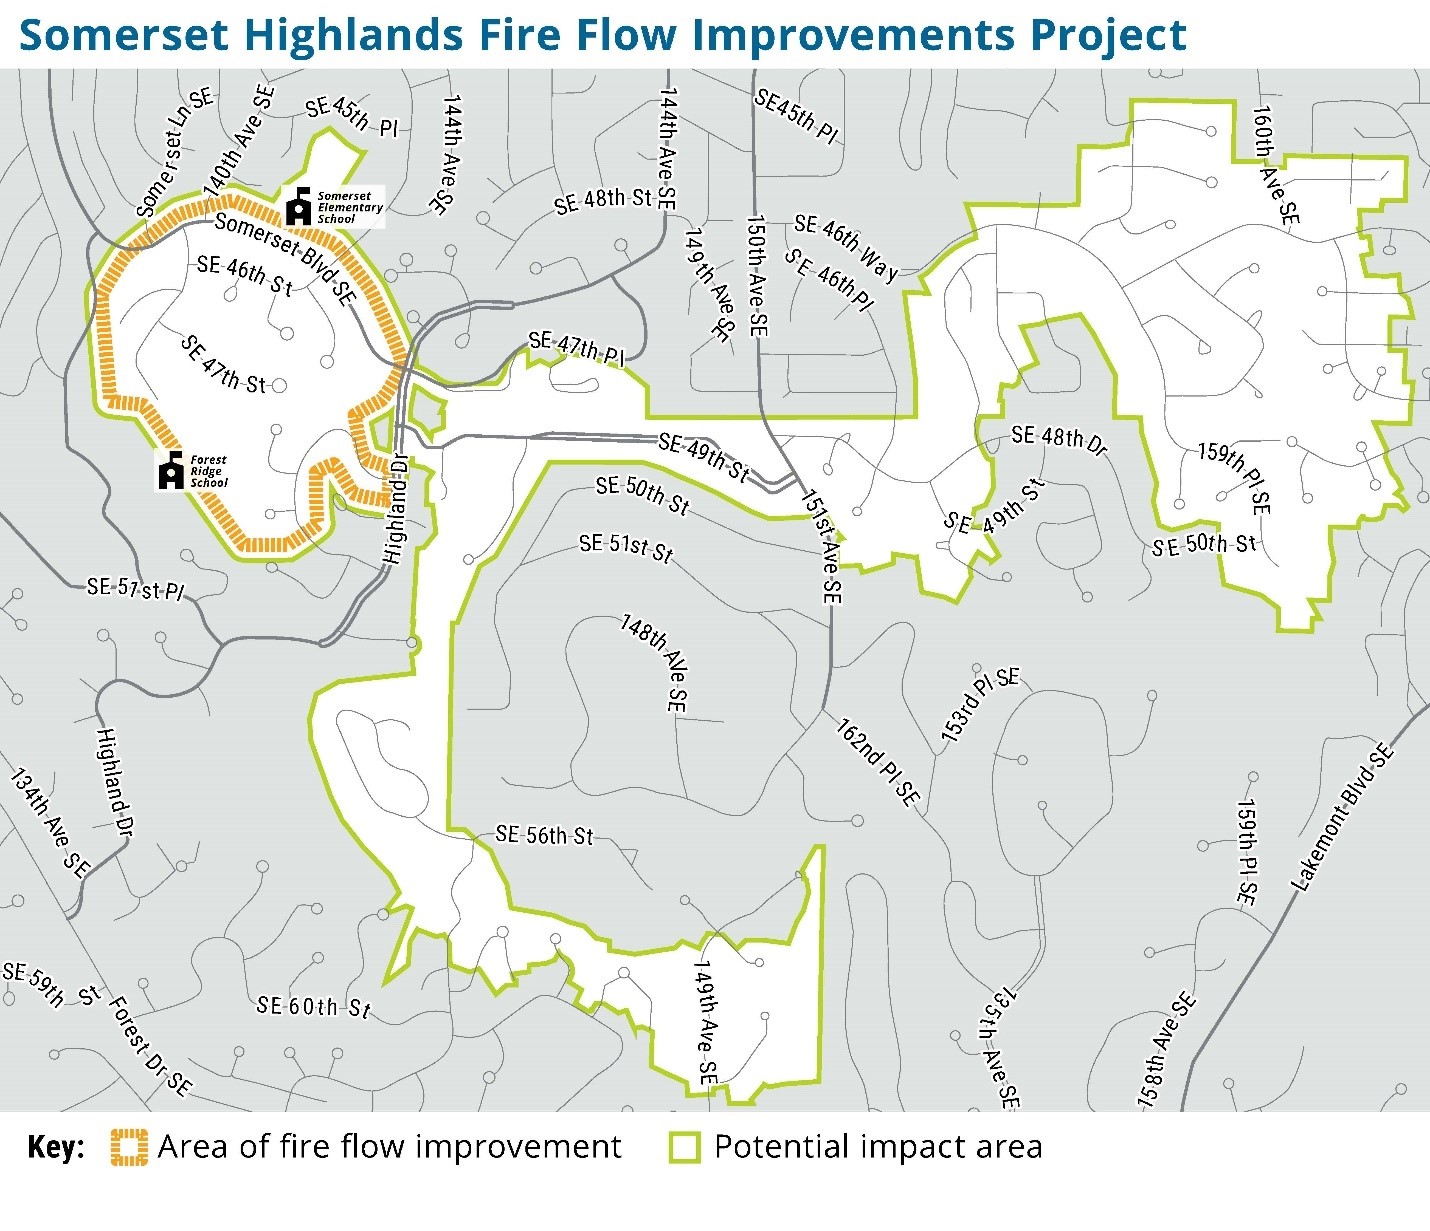 A map of the project shows the area that will receive fire flow improvements, located between Highland Drive, Somerset Boulevard SE, Somerset Avenue SE, and 136th Place SE, as well as the area that may be impacted by different improvement scenarios. 